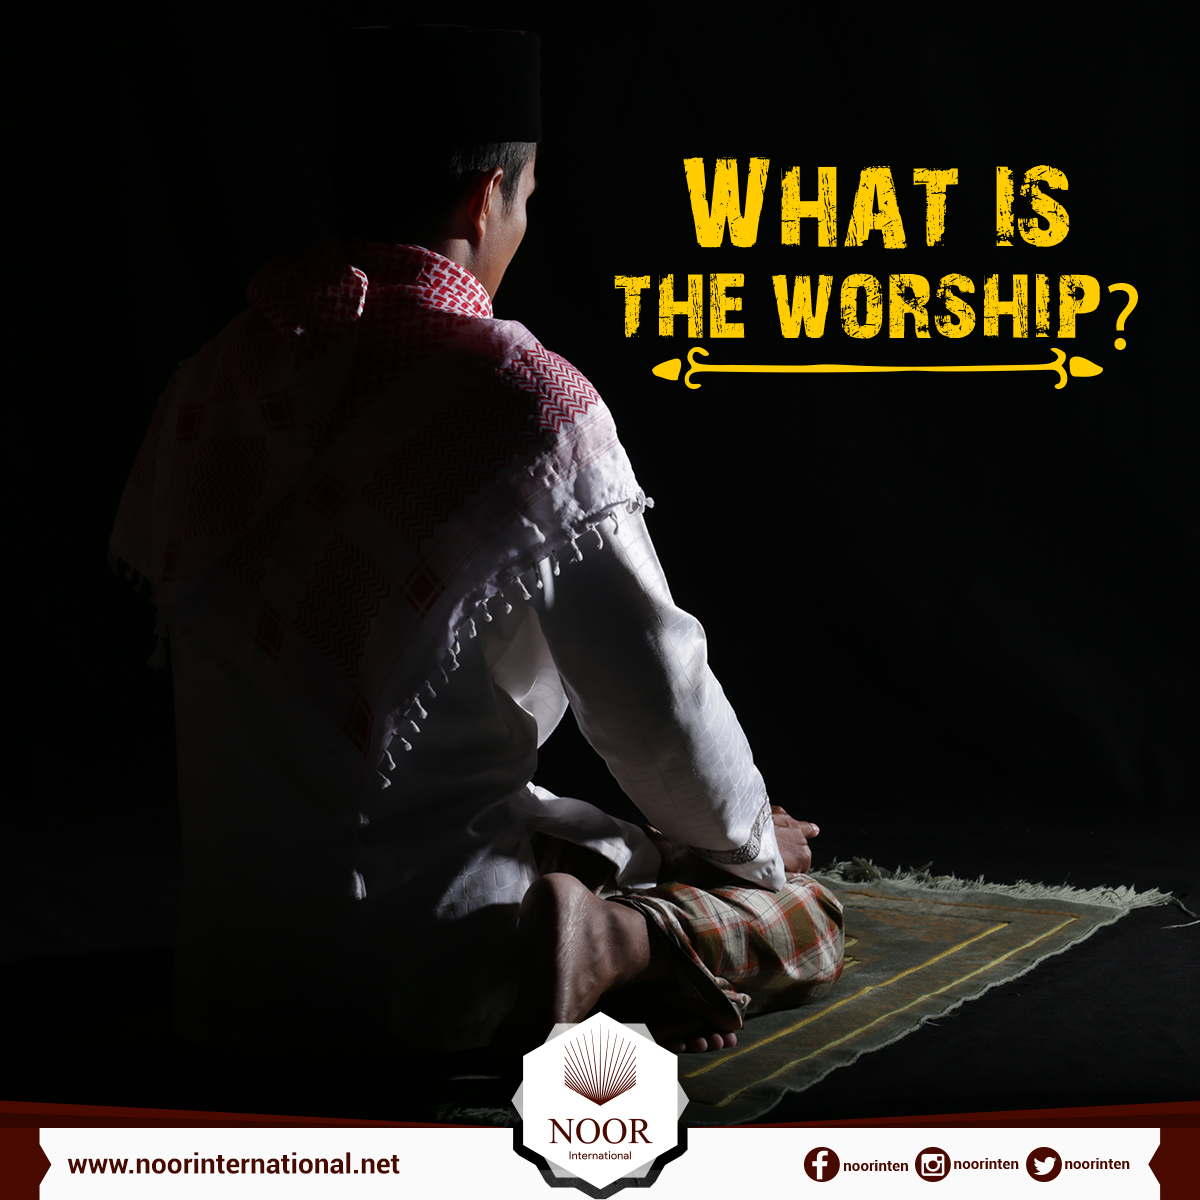 What is the worship?